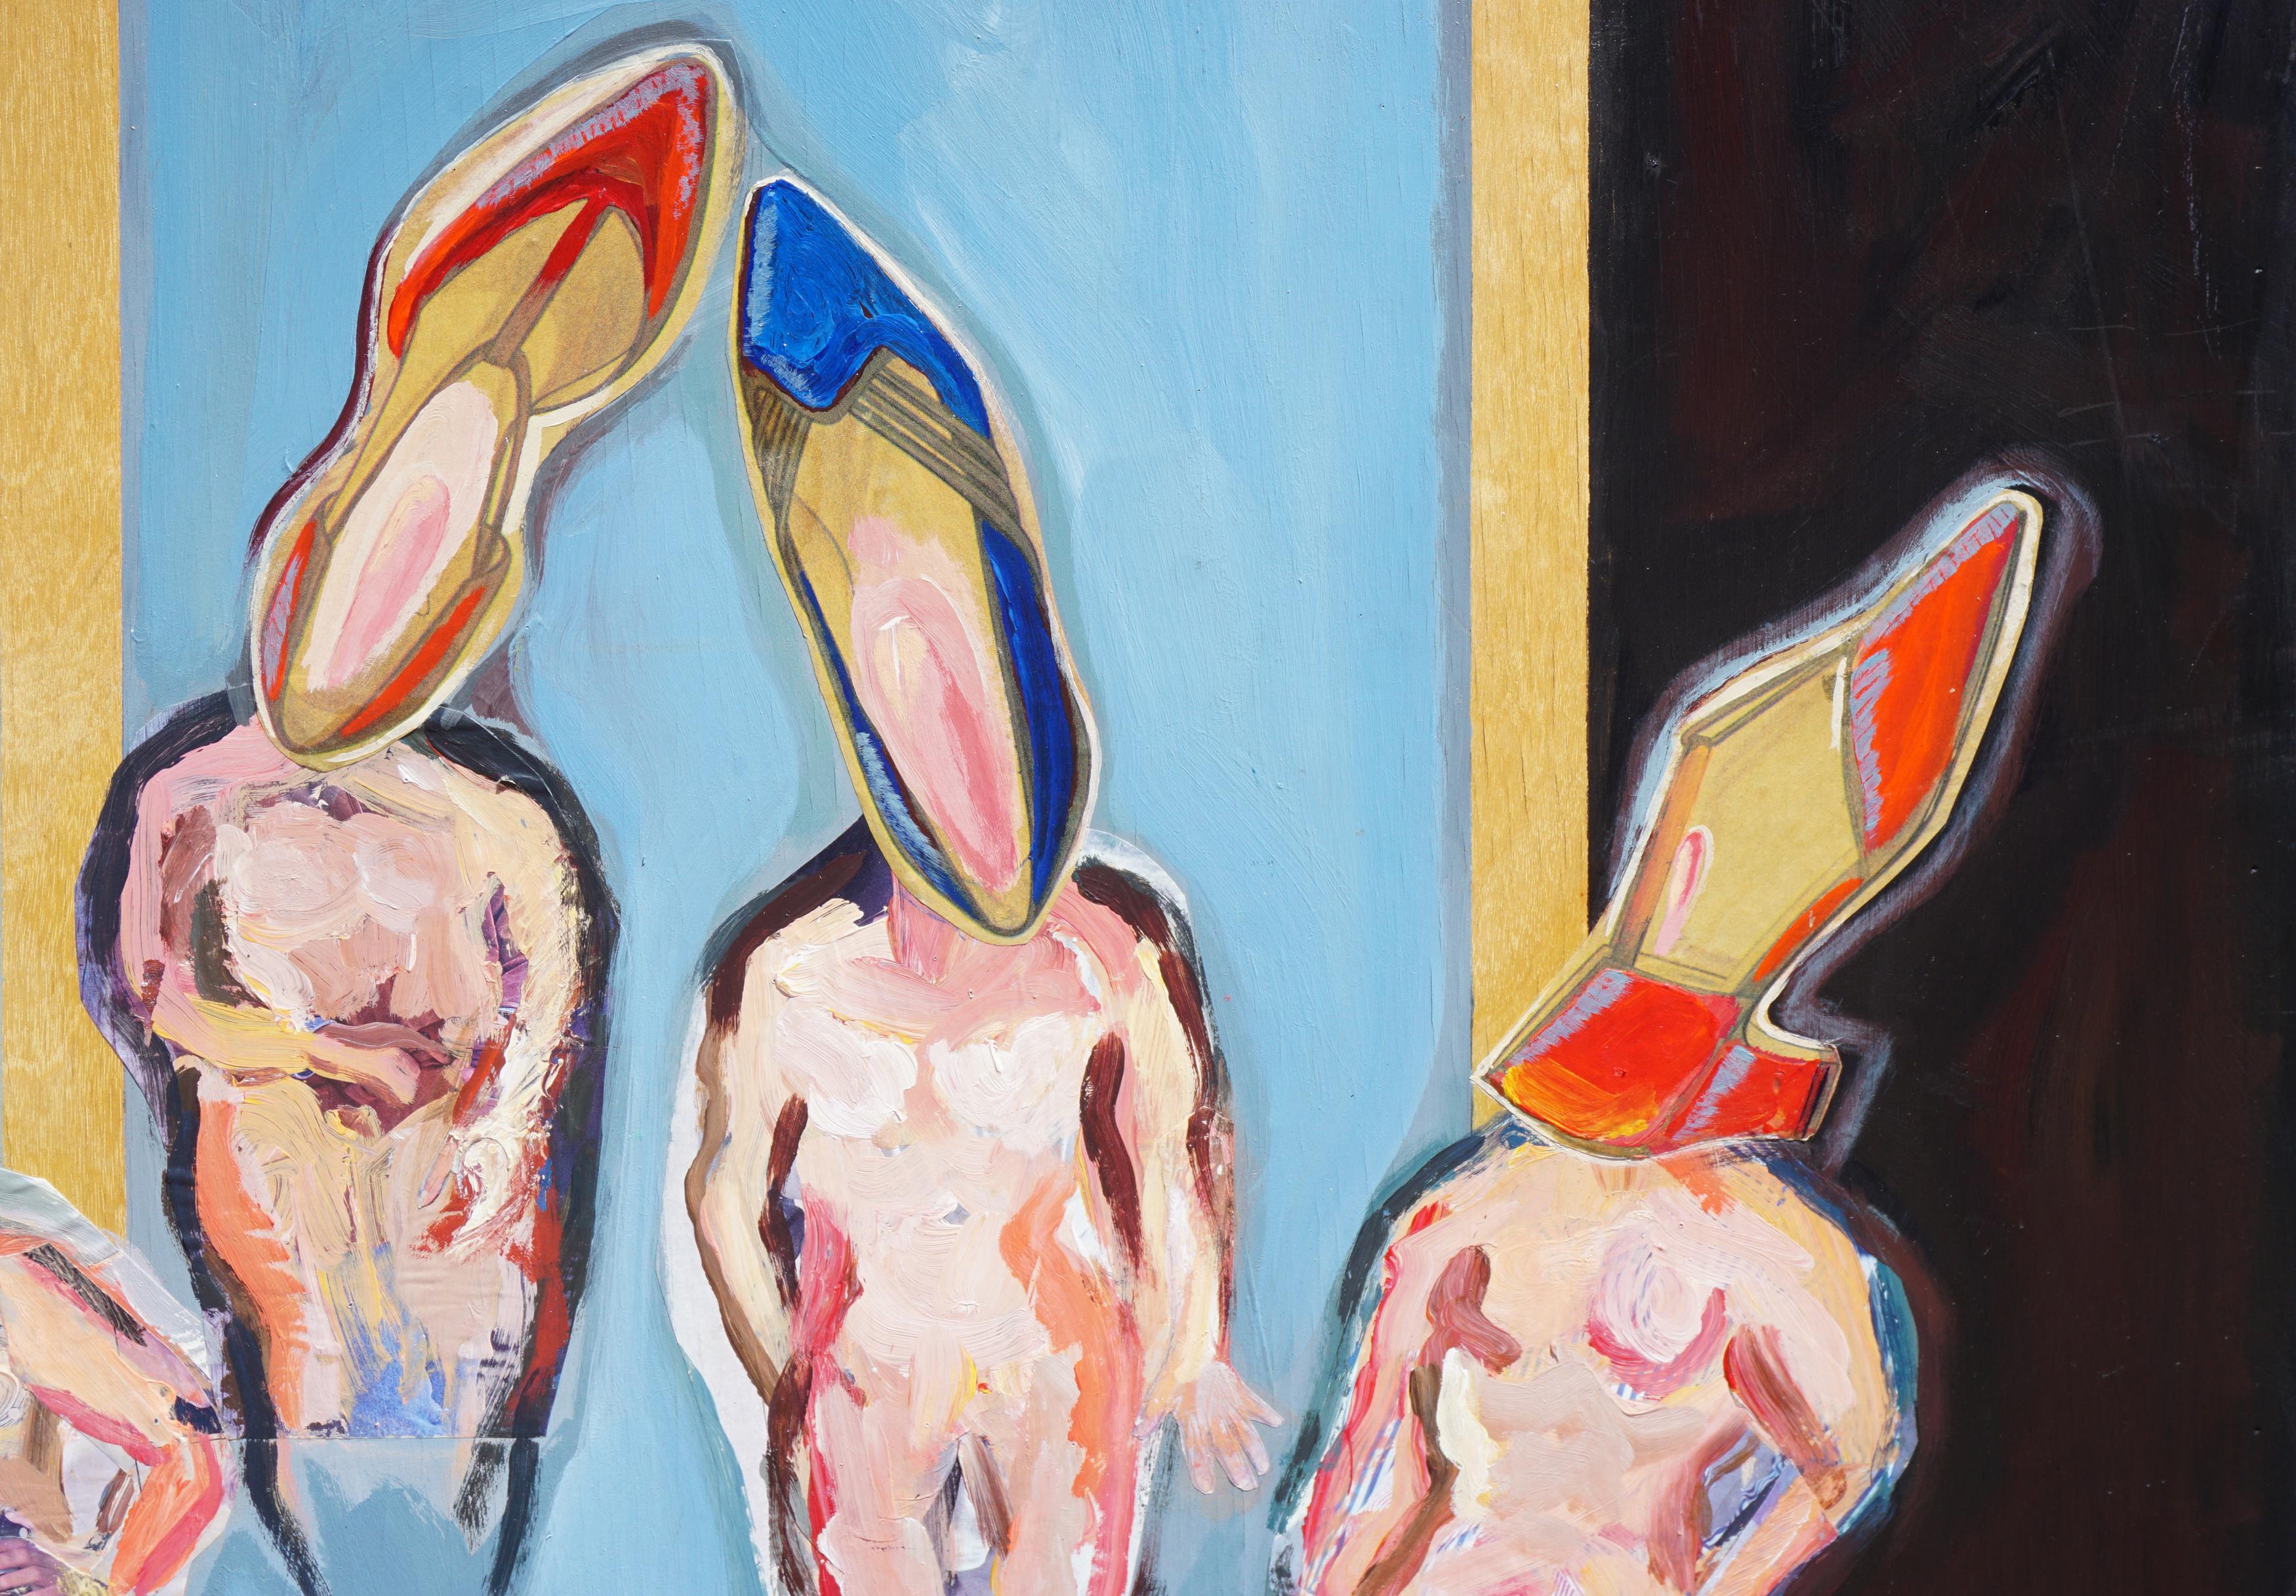 Shoe Fetish! Whimsical Surrealist Abstract Figurative with High Heel Heads  - Painting by M. Jane Balanoff